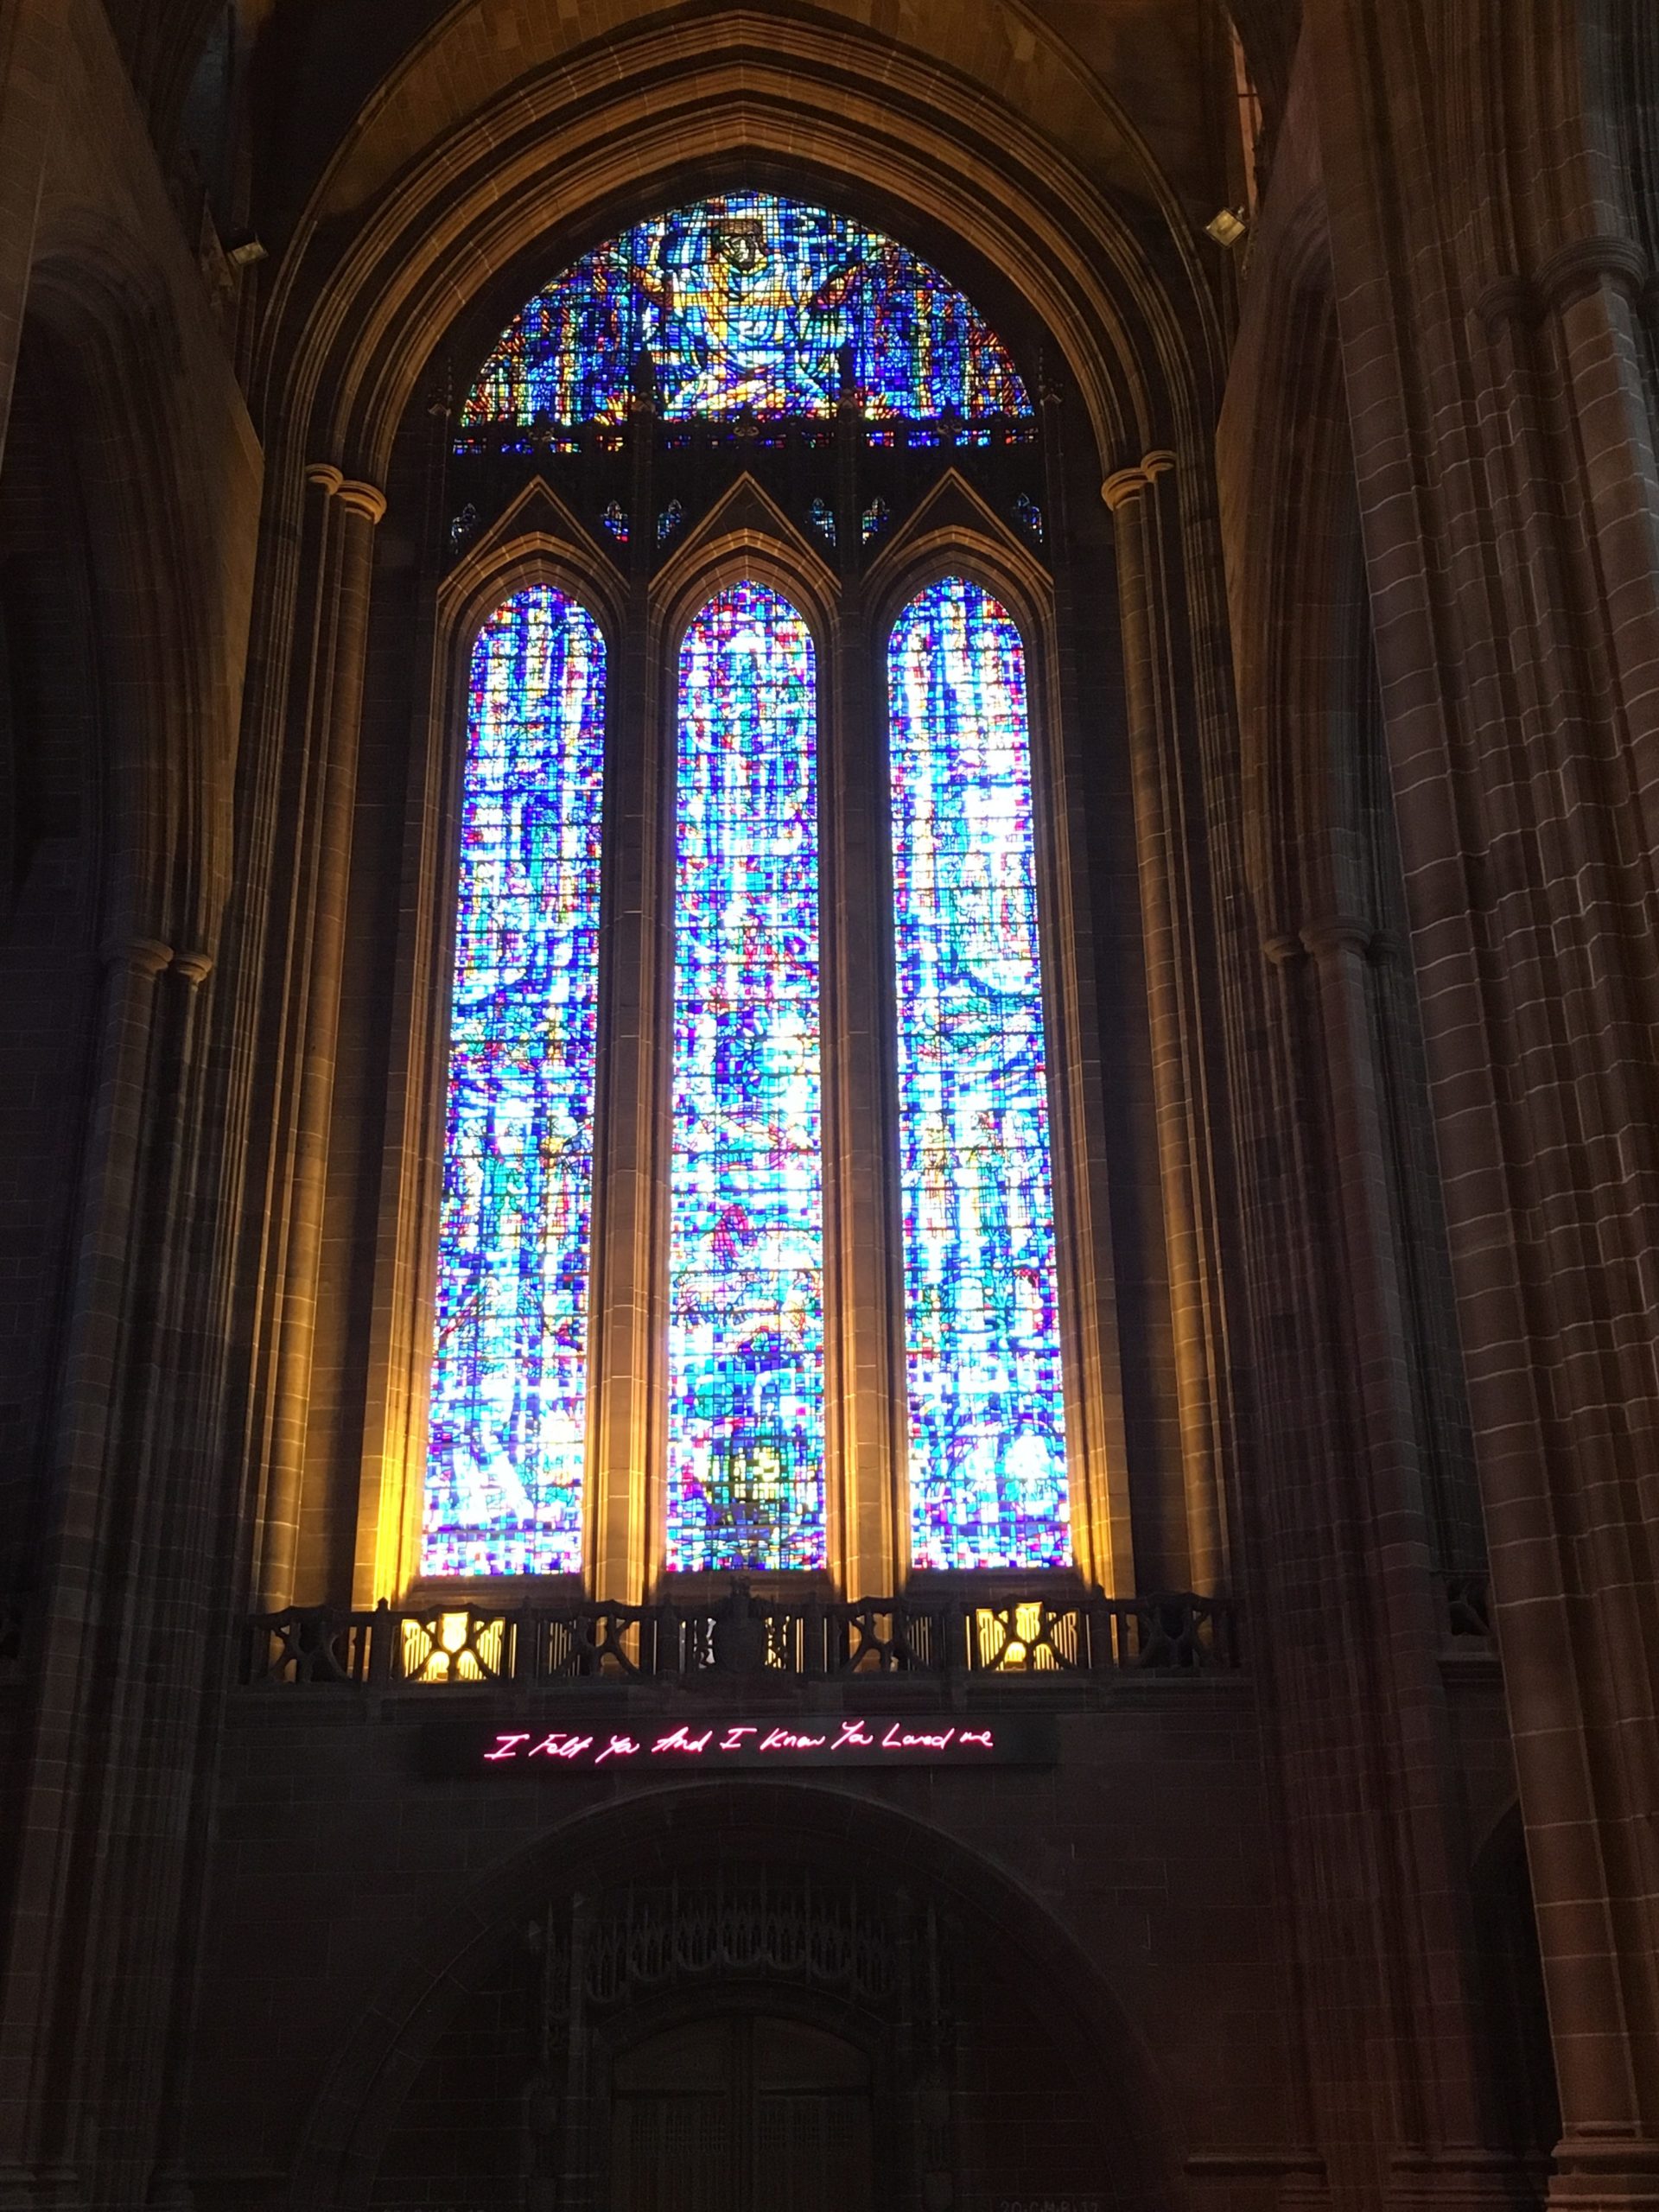 RE PGCE: Liverpool Anglican Cathedral visit